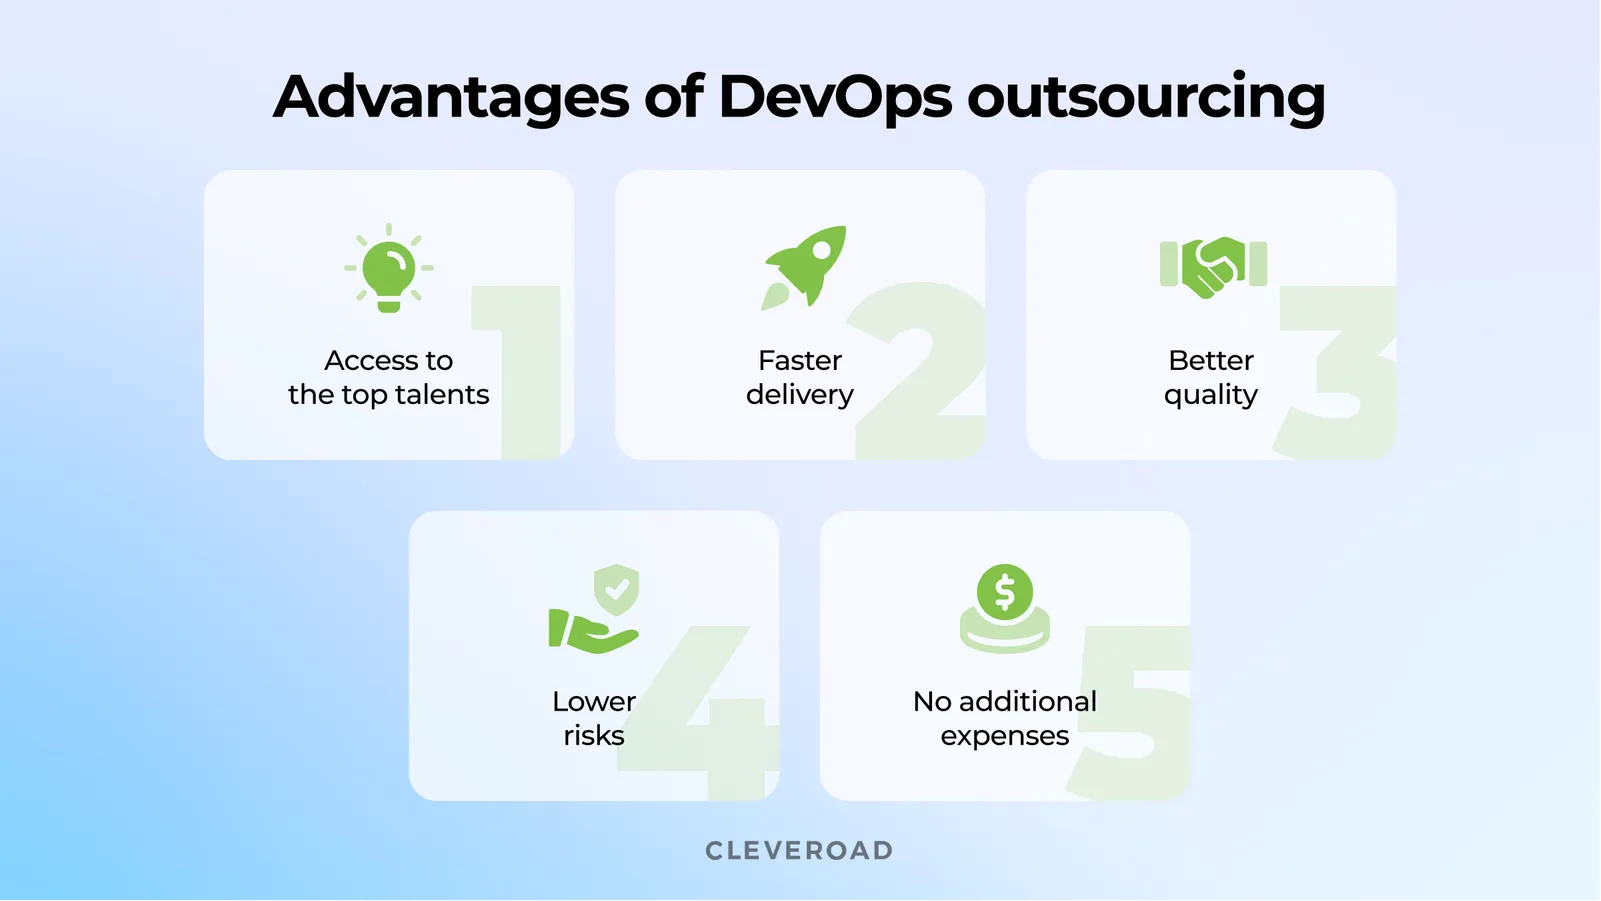 Why outsource DevOps?